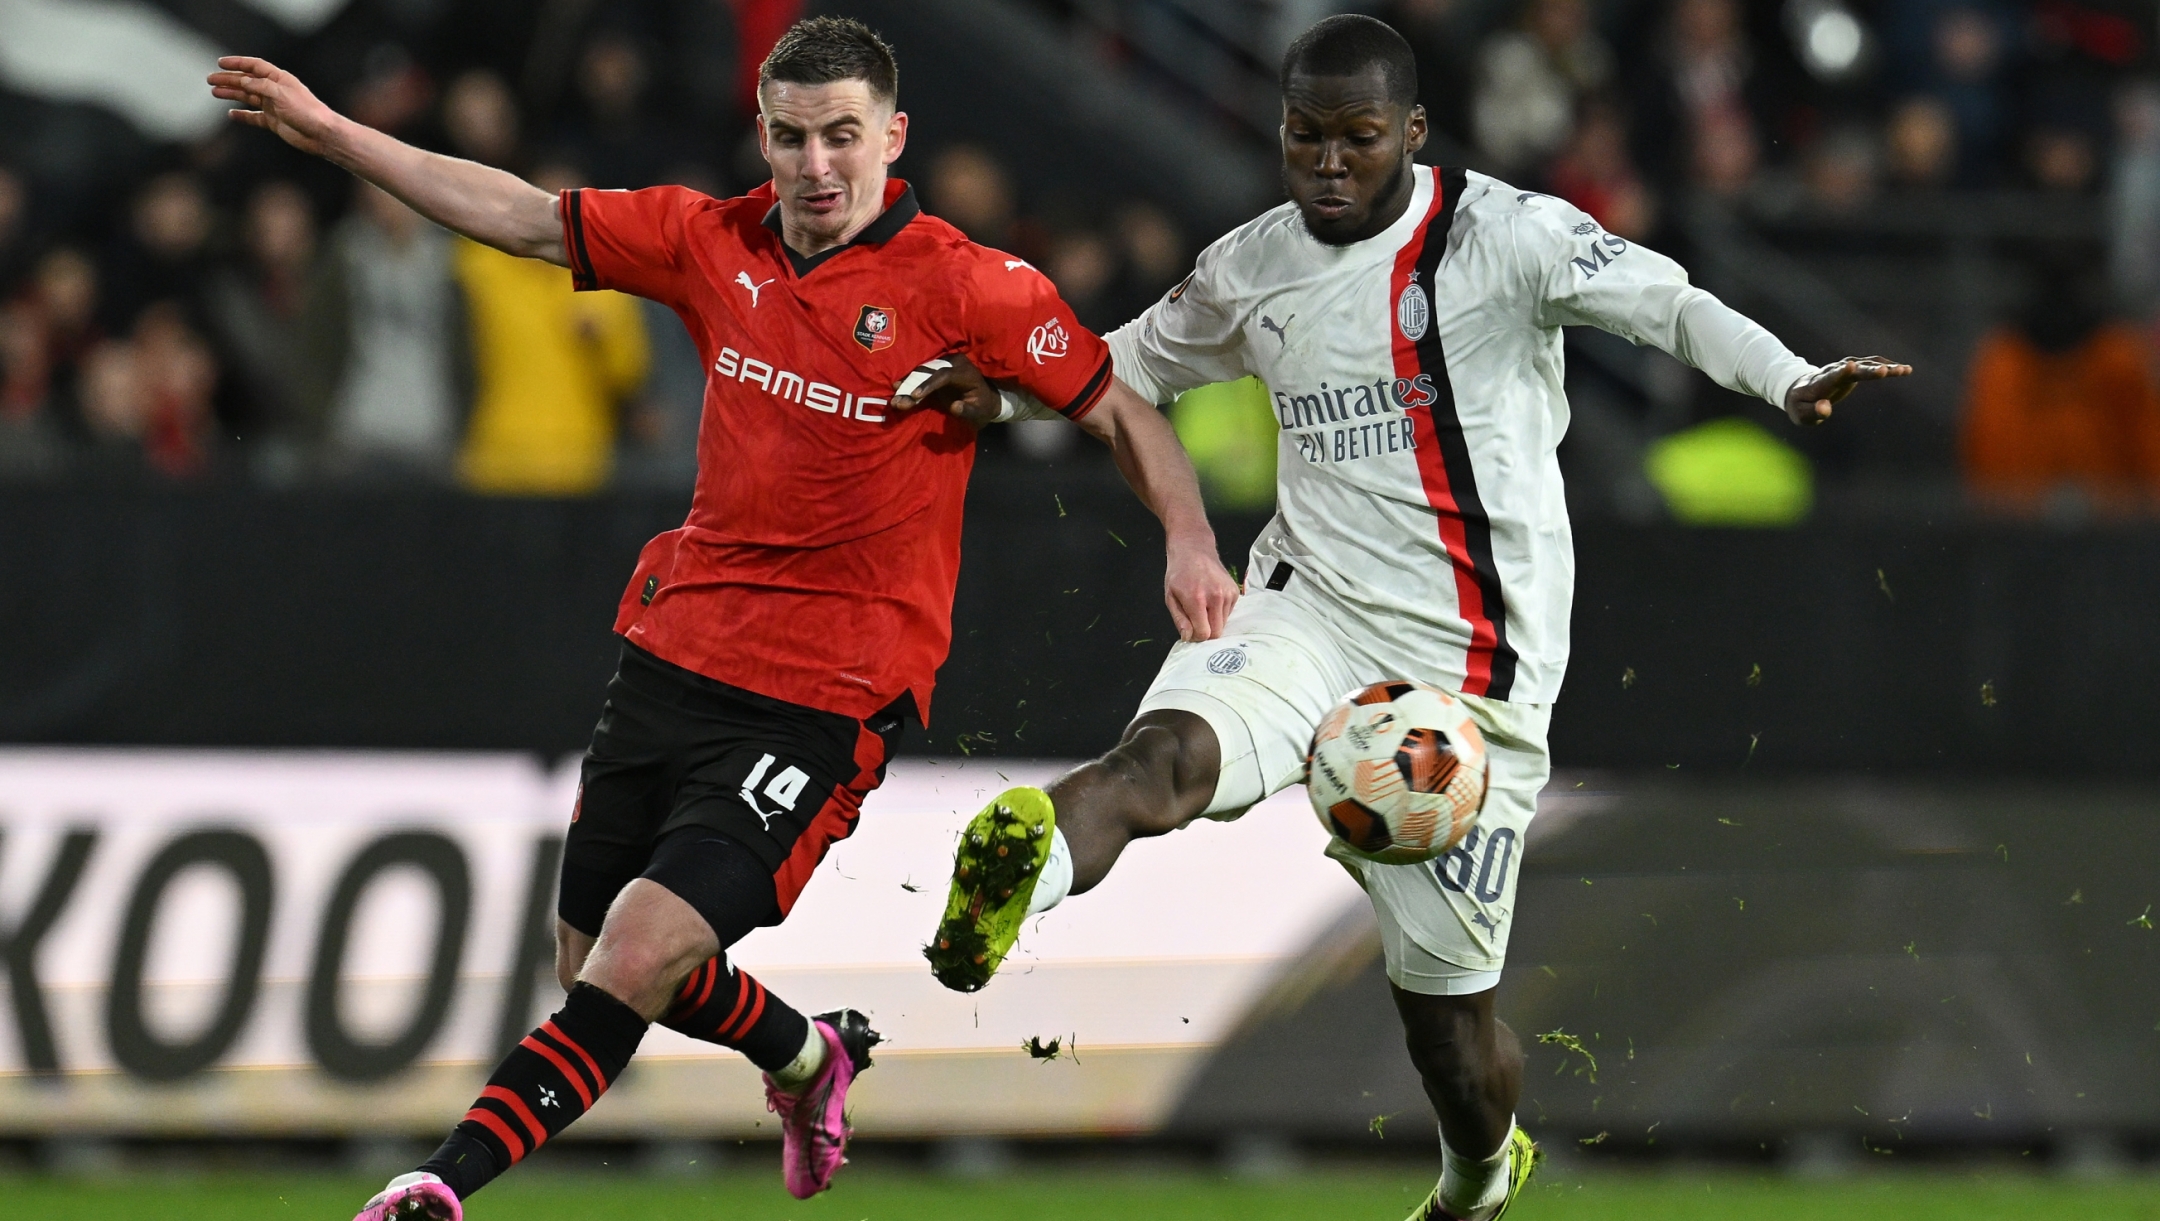 RENNES, FRANCE - FEBRUARY 22:  Yunus Musah  of AC Milan competes for the ball with Benjamin Bourigeaud of Stade Rennais FC during the UEFA Europa League 2023/24 playoff second leg match between Stade Rennais FC and AC Milan at Roazhon Park on February 22, 2024 in Rennes, France. (Photo by Claudio Villa/AC Milan via Getty Images)